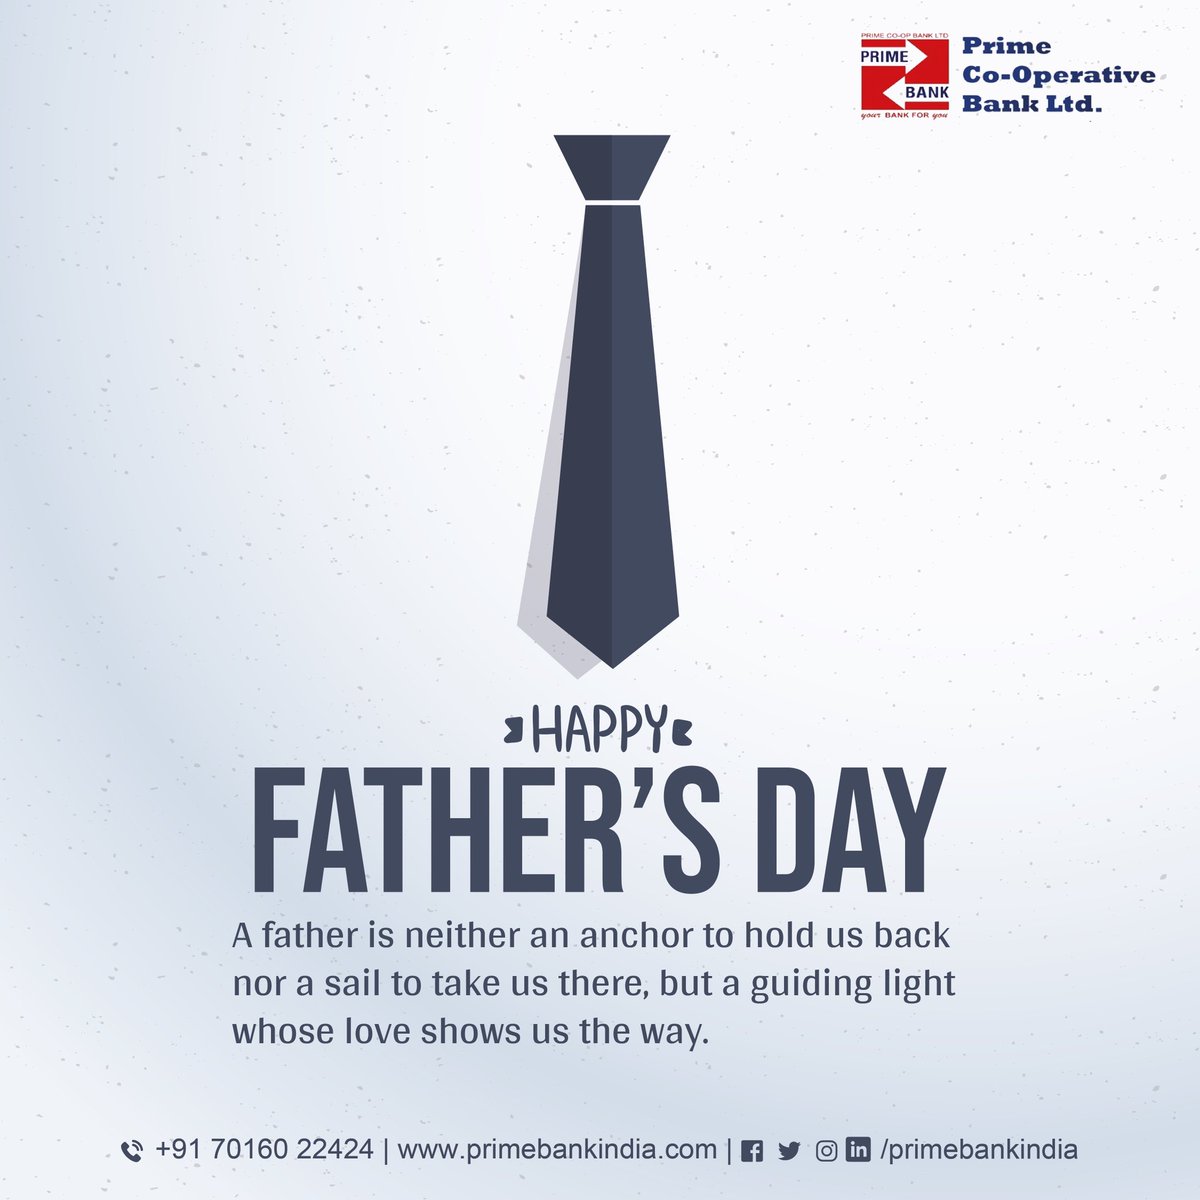 Celebrating the guiding light in our lives, Happy Father's Day

#Fathersday2023 #HappyFathersDay #Hero #fatherhood #guidelife #love #primebank